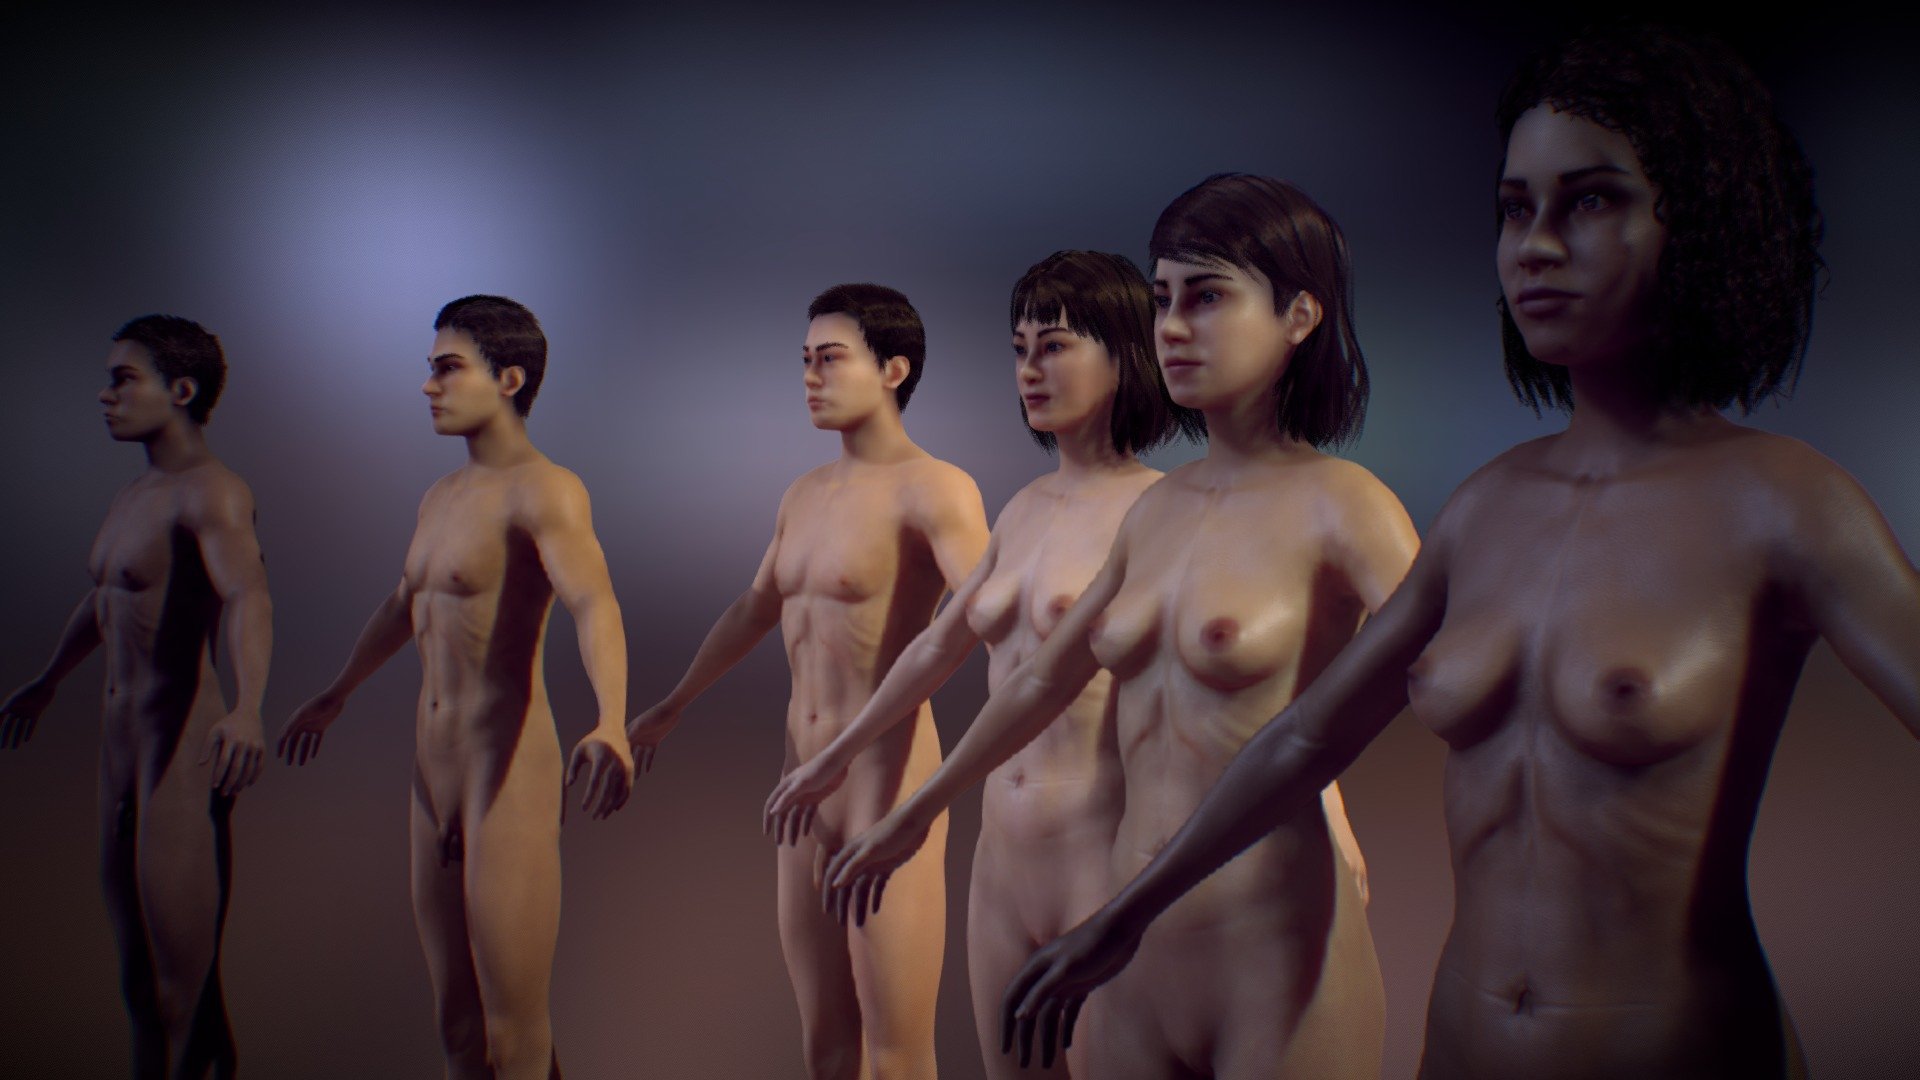 A collection made based on three ethnicities: Caucasian, African and Asian. Each ethnic group has its male and female, dressed and naked version.

In this version you receive all the models on the screen with clothes and naked.
This model has 24 animations.

Rigged and animated

Formats:

.dae .blend .Fbx

Contains:

Naked Body, Clothing (Shirt, Pants and Shoes), Hair

Textures:

Albedo, Normal, Specular, Alpha, Reflection

(Most textures are in 1024x1024) - Men and Women Package - Buy Royalty Free 3D model by Gabriel Souza (@gabrielsouza) 3d model